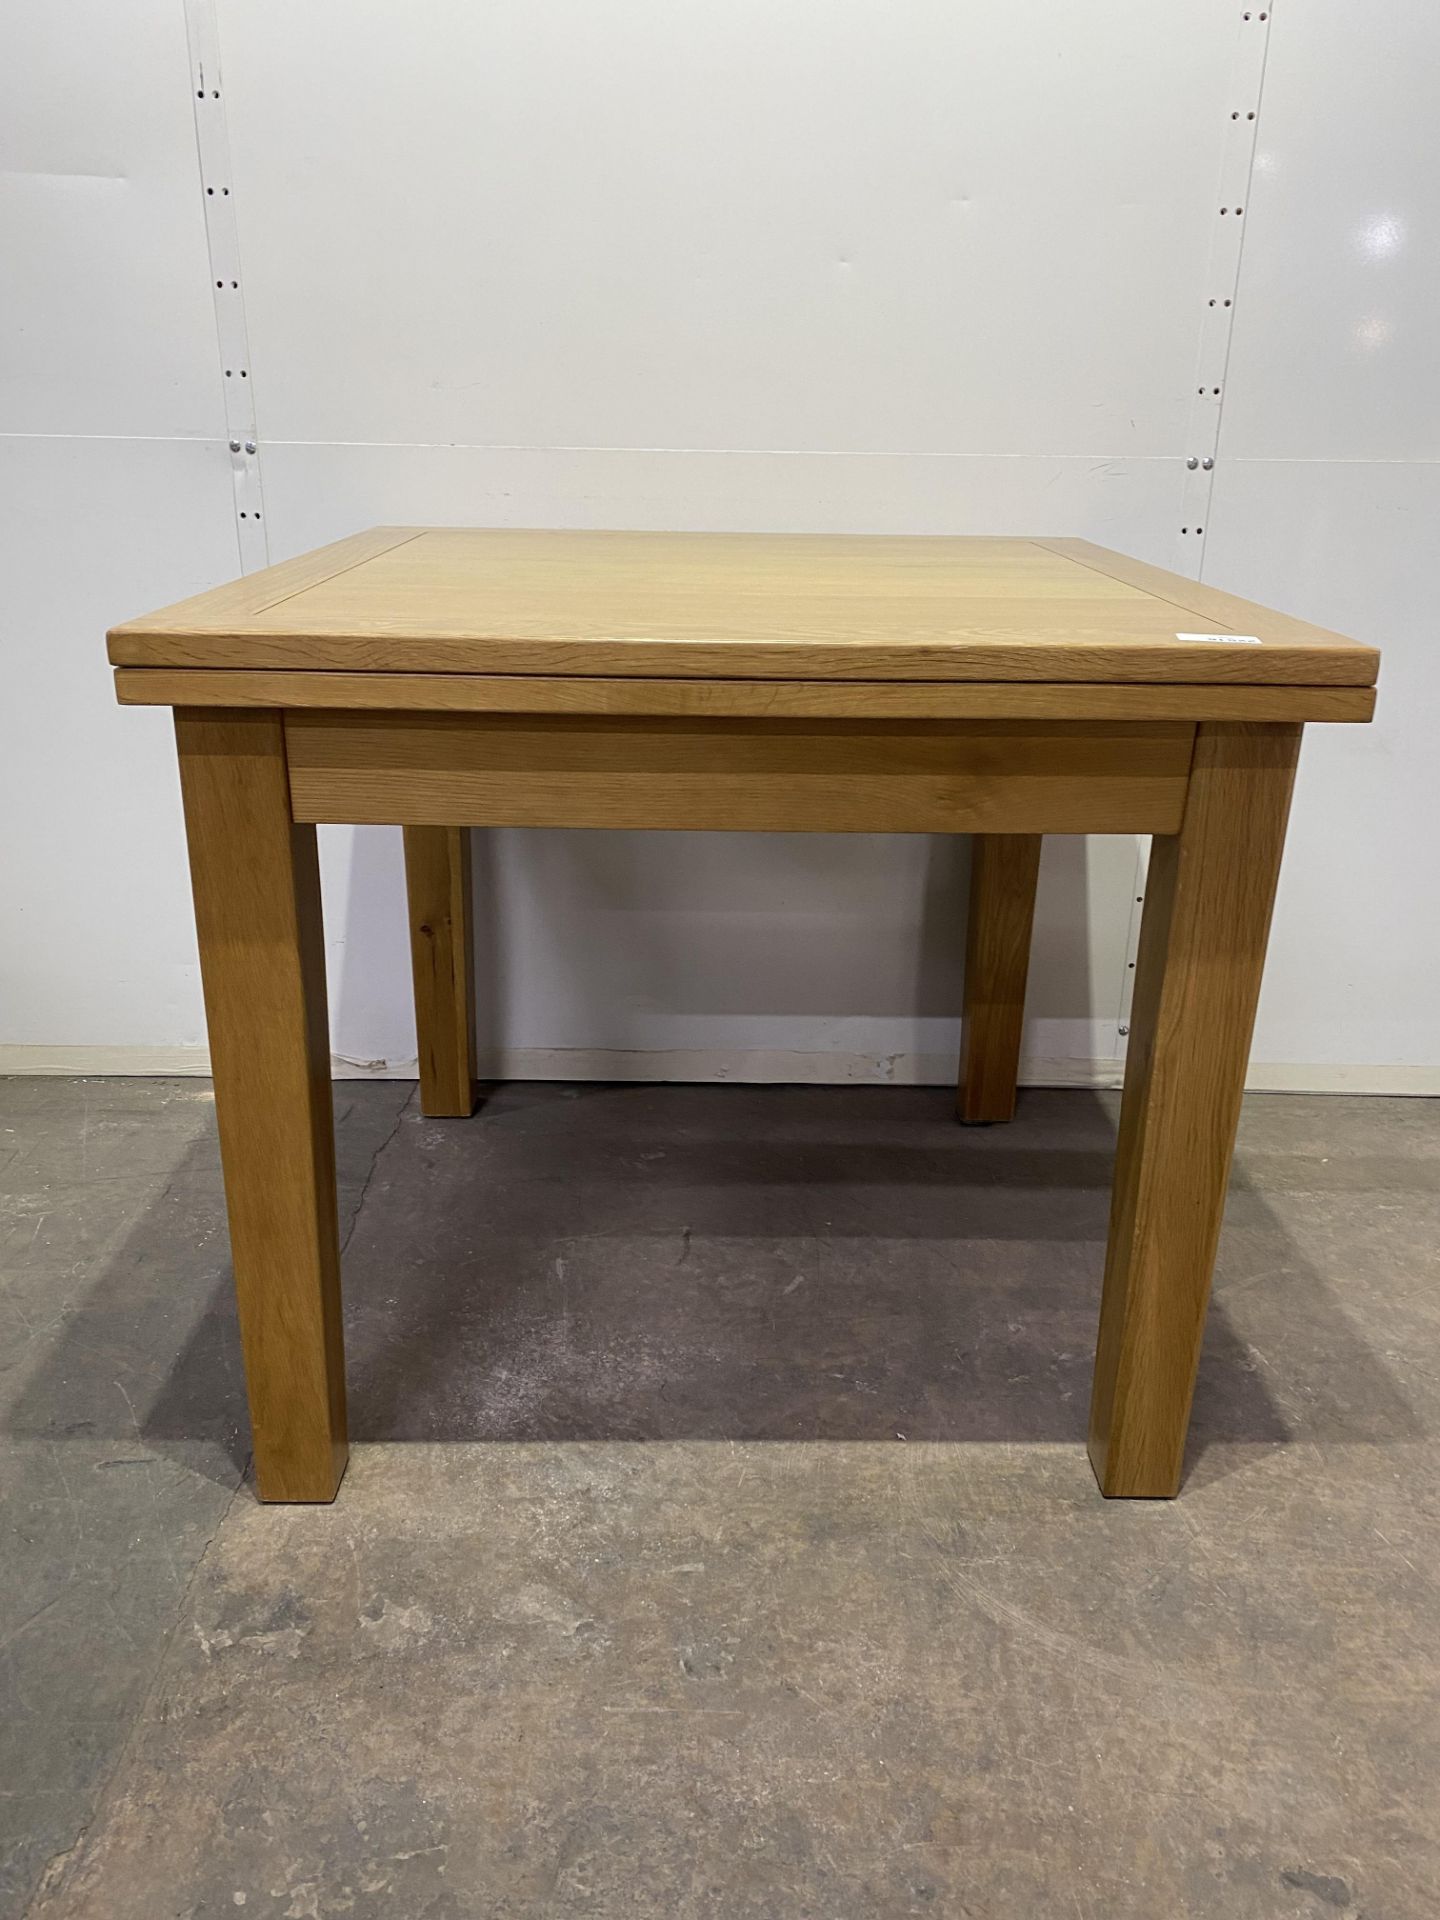 90cm - 180cm Foldable Wooden Dining Table - Image 2 of 6